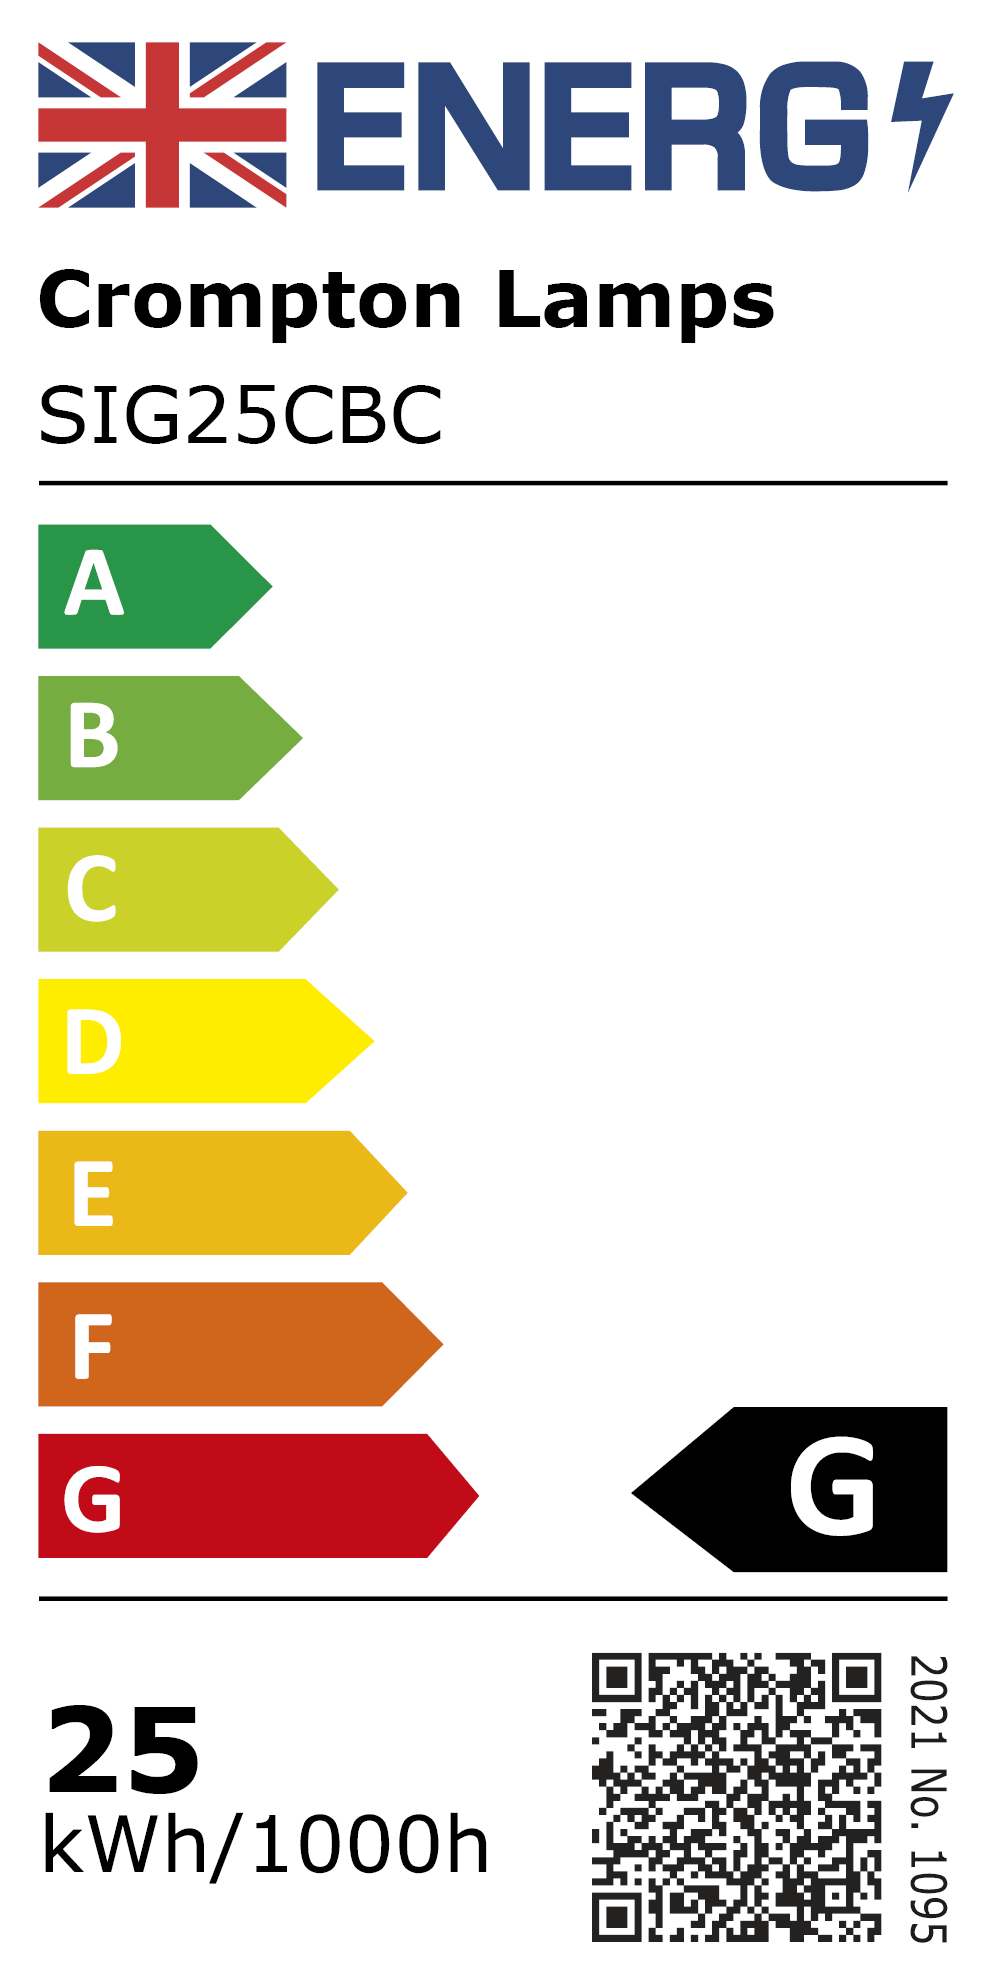 New 2021 Energy Rating Label: Stock Code SIG25CBC